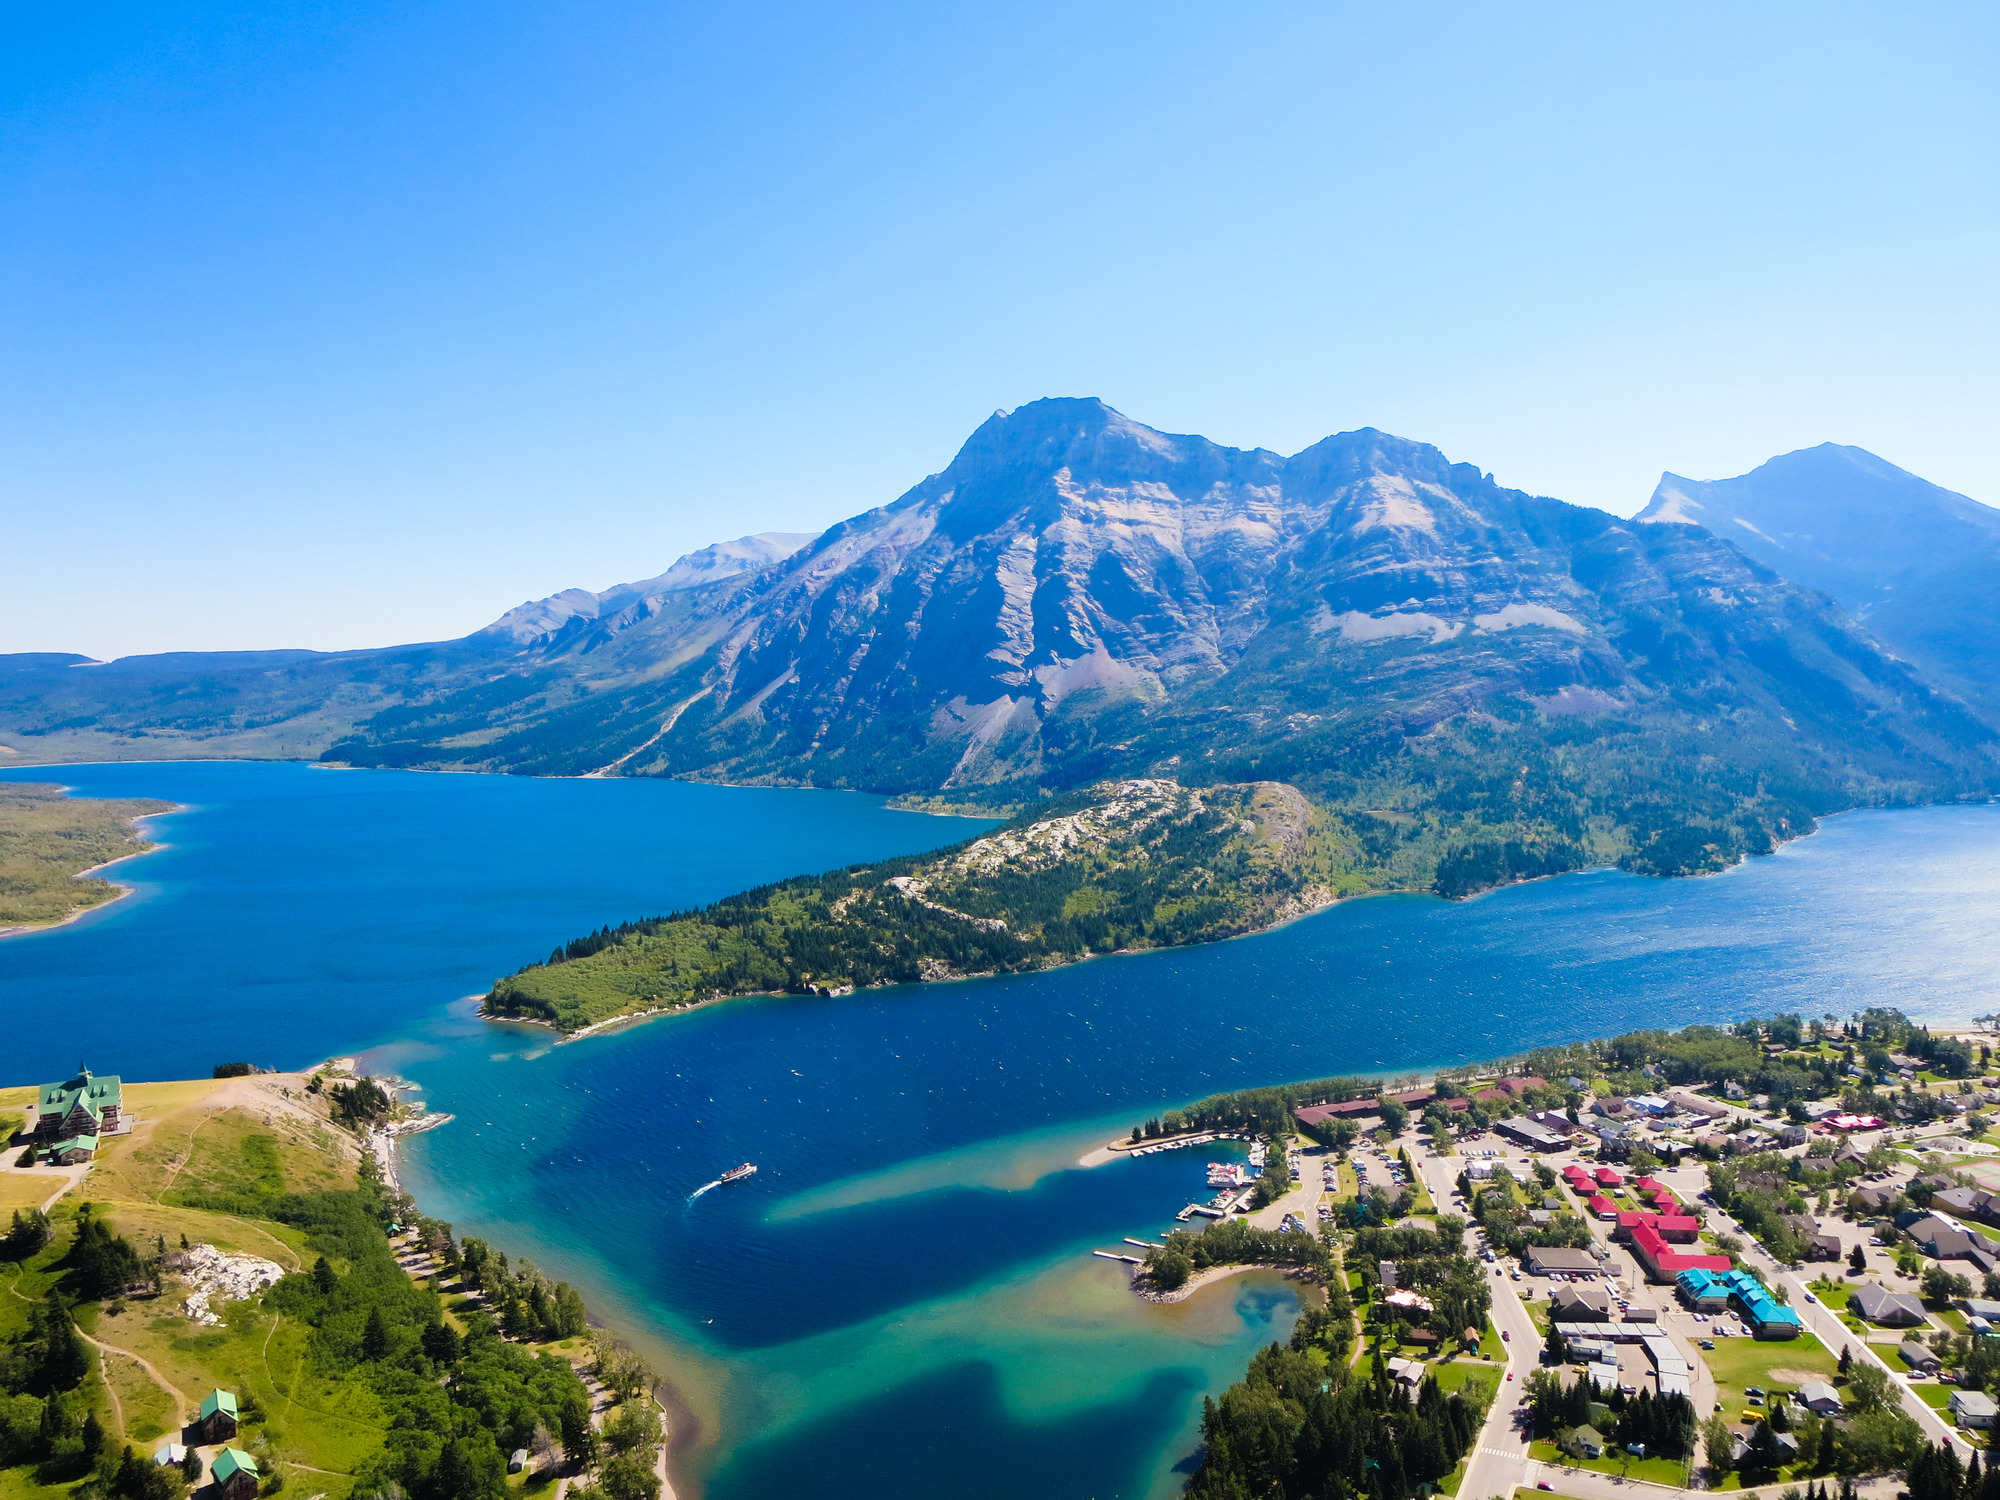 Day trip to Waterton Lakes National Park, Prince of Wales Hotel ,Cameron Falls from Calgary